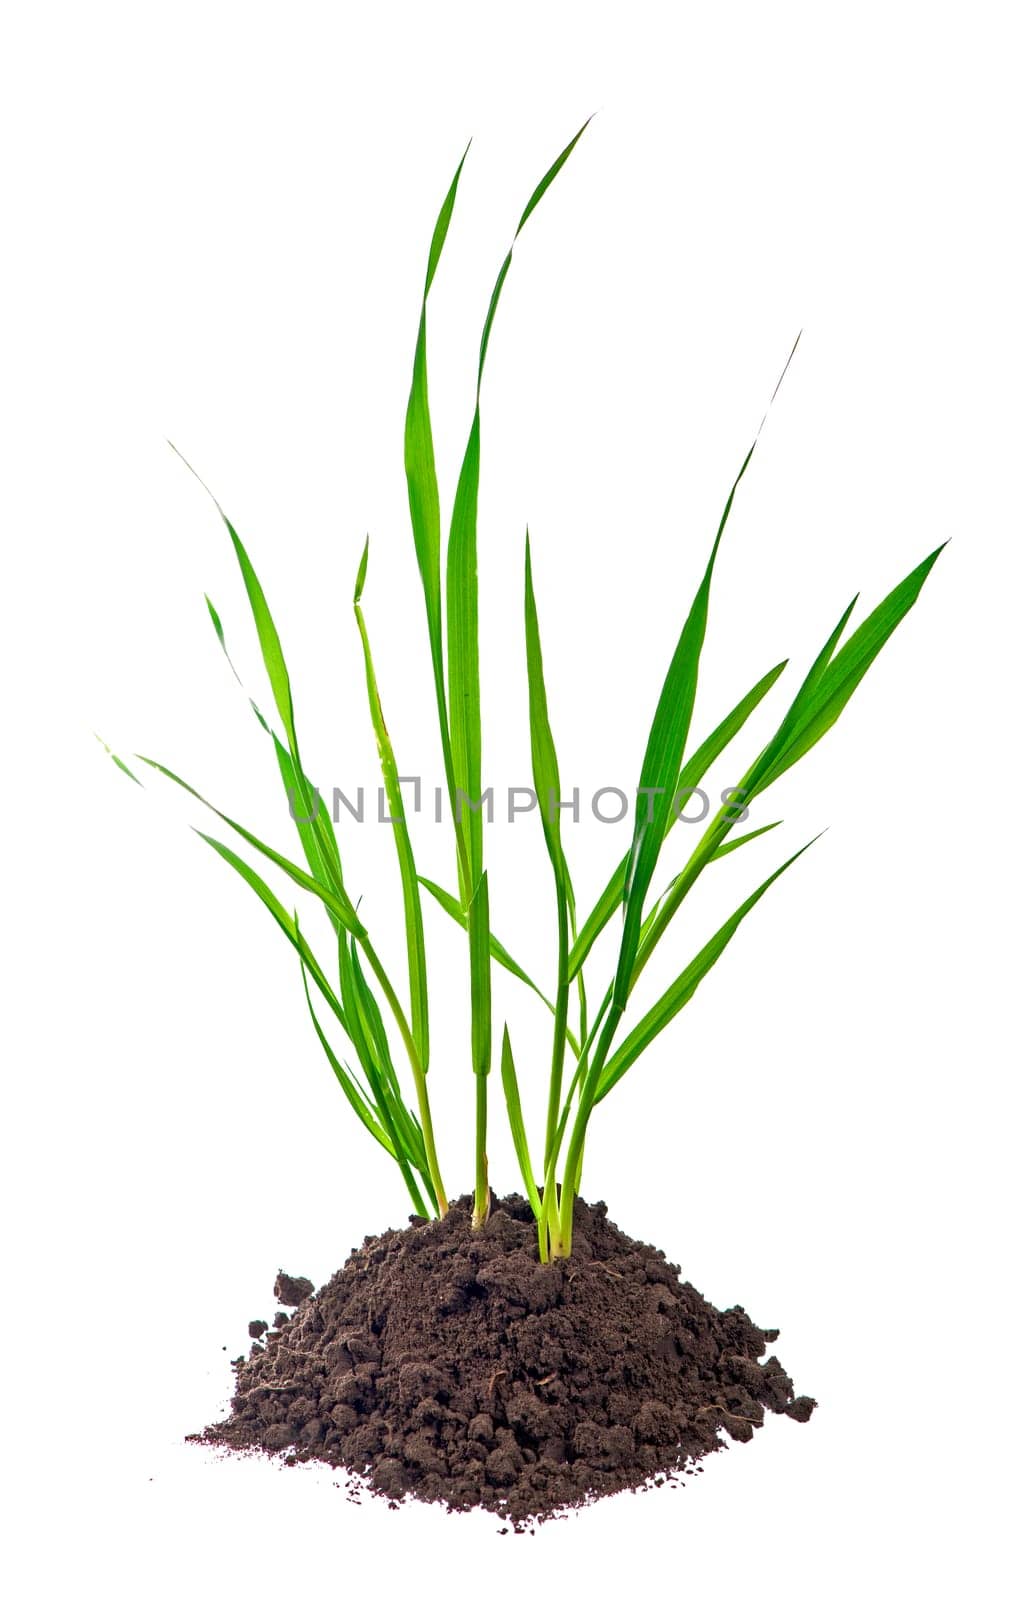 Young wheat plant with soil against a white background